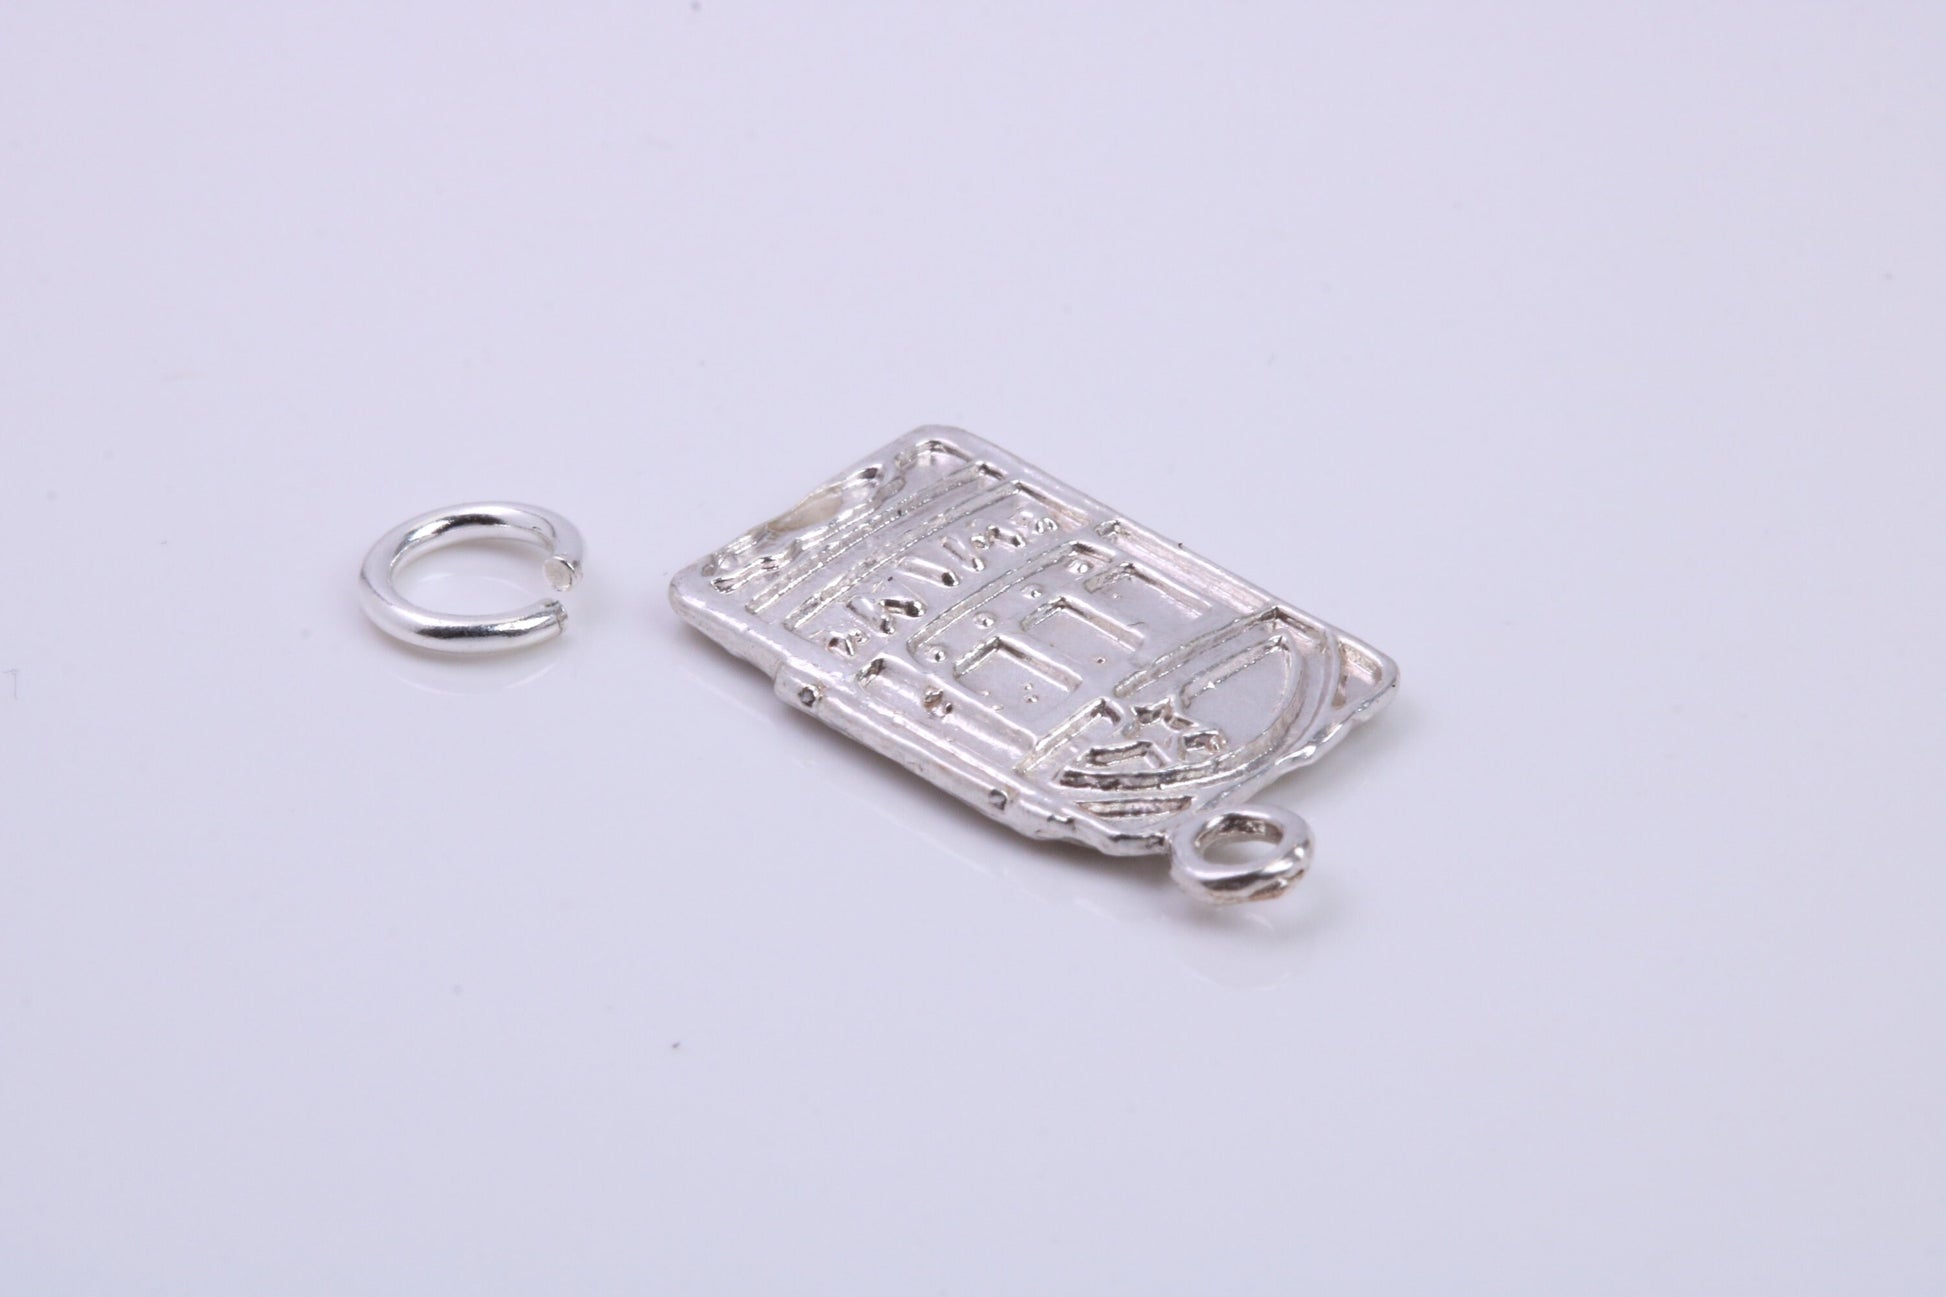 Slot Machine Charm, Traditional Charm, Made from Solid 925 Grade Sterling Silver, Complete with Attachment Link